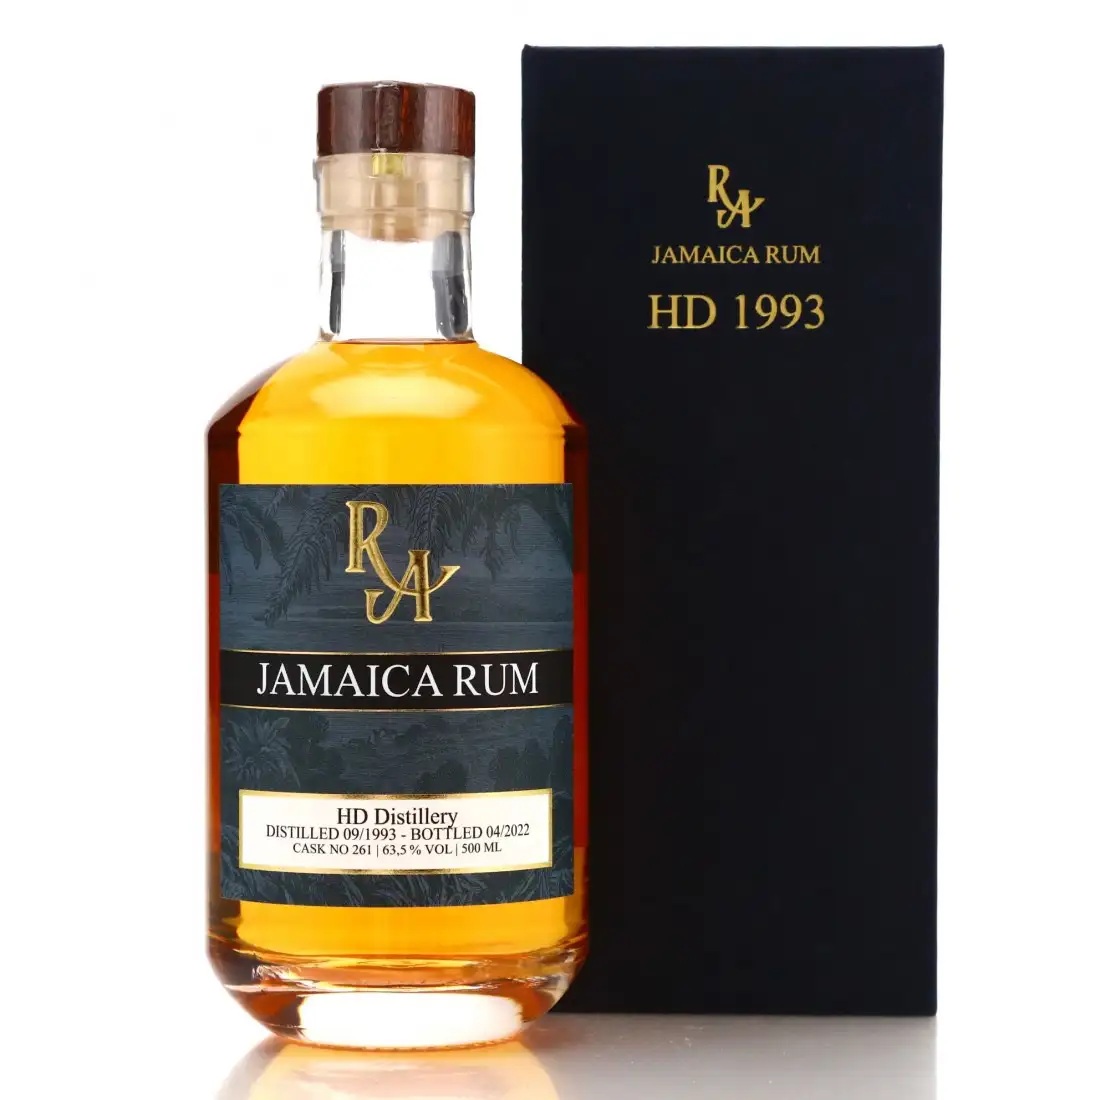 Image of the front of the bottle of the rum Rum Artesanal HD C<>H